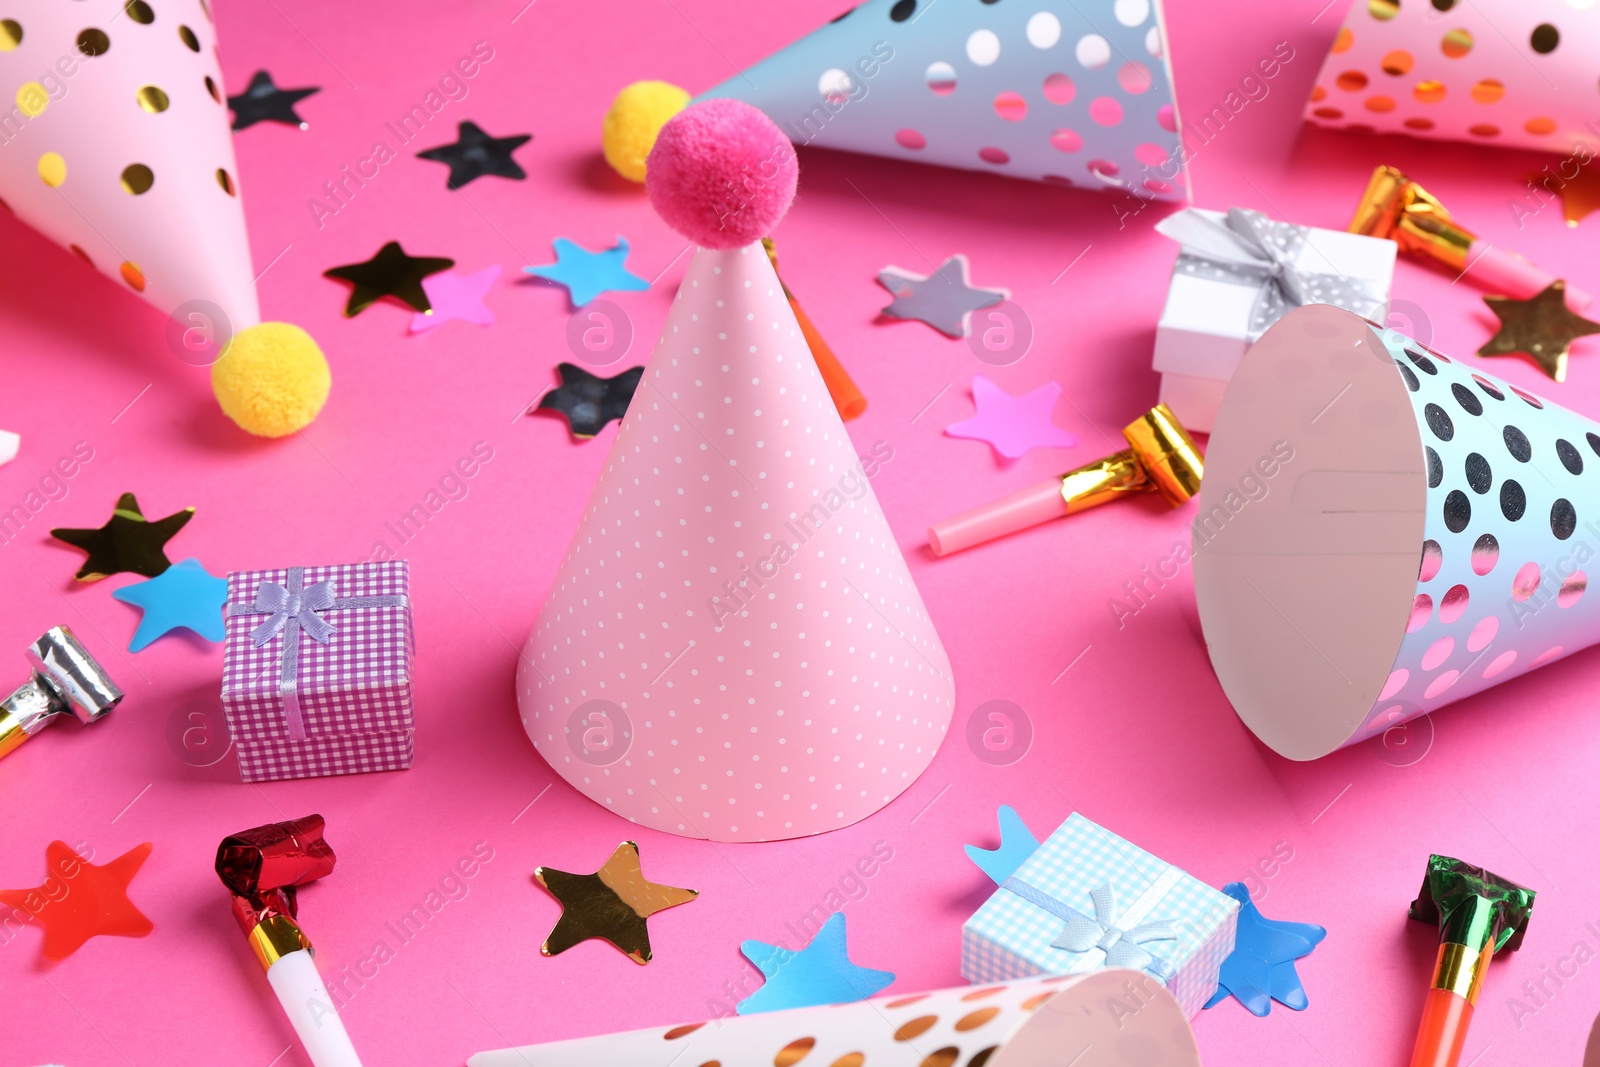 Photo of Party hats and other bright decor elements on pink background